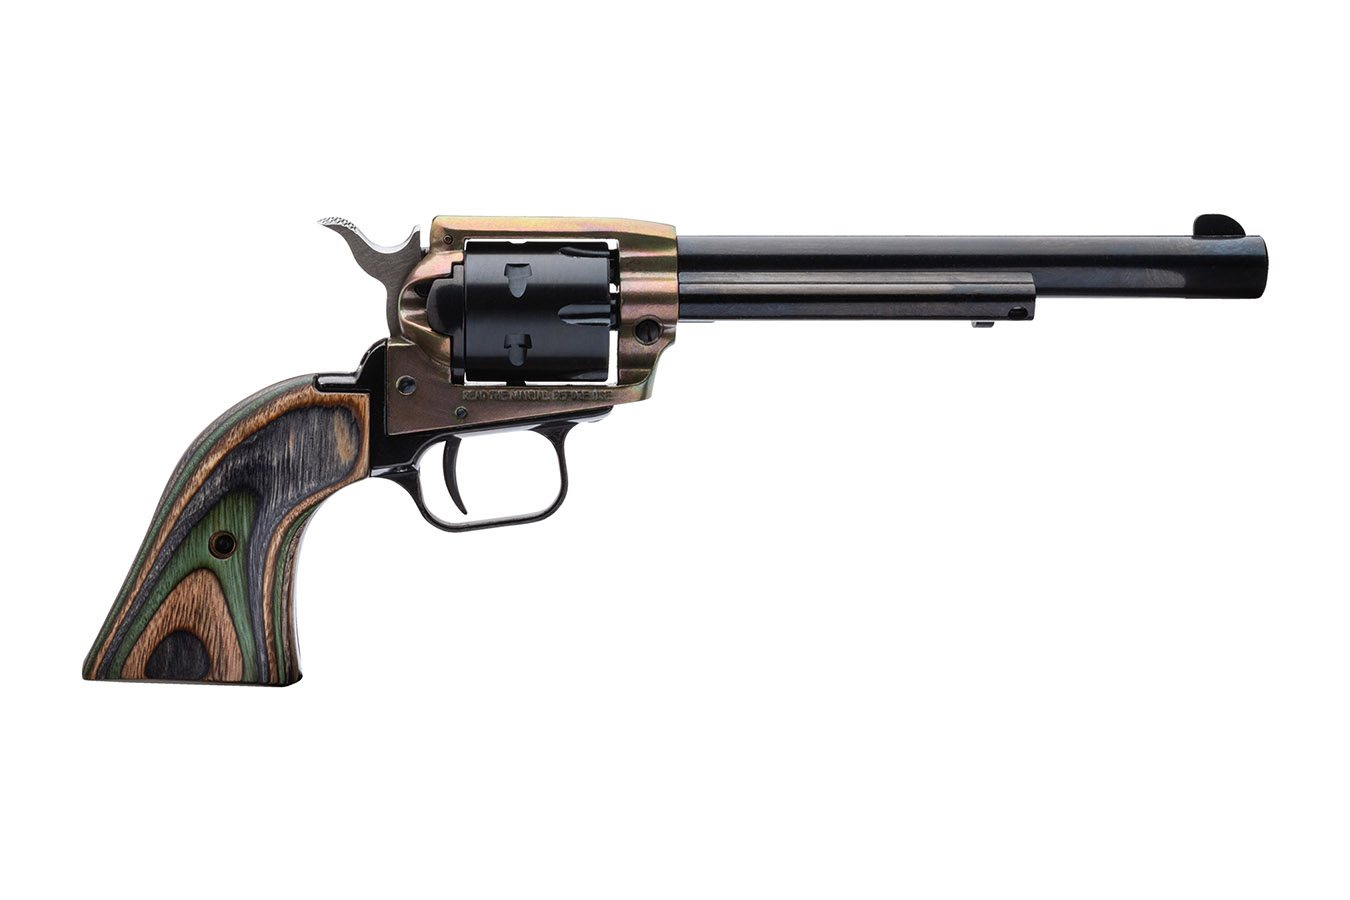 HERITAGE ROUGH RIDER .22CAL 6 SHOT REVOLVER WITH CAMO WOOD GRIP